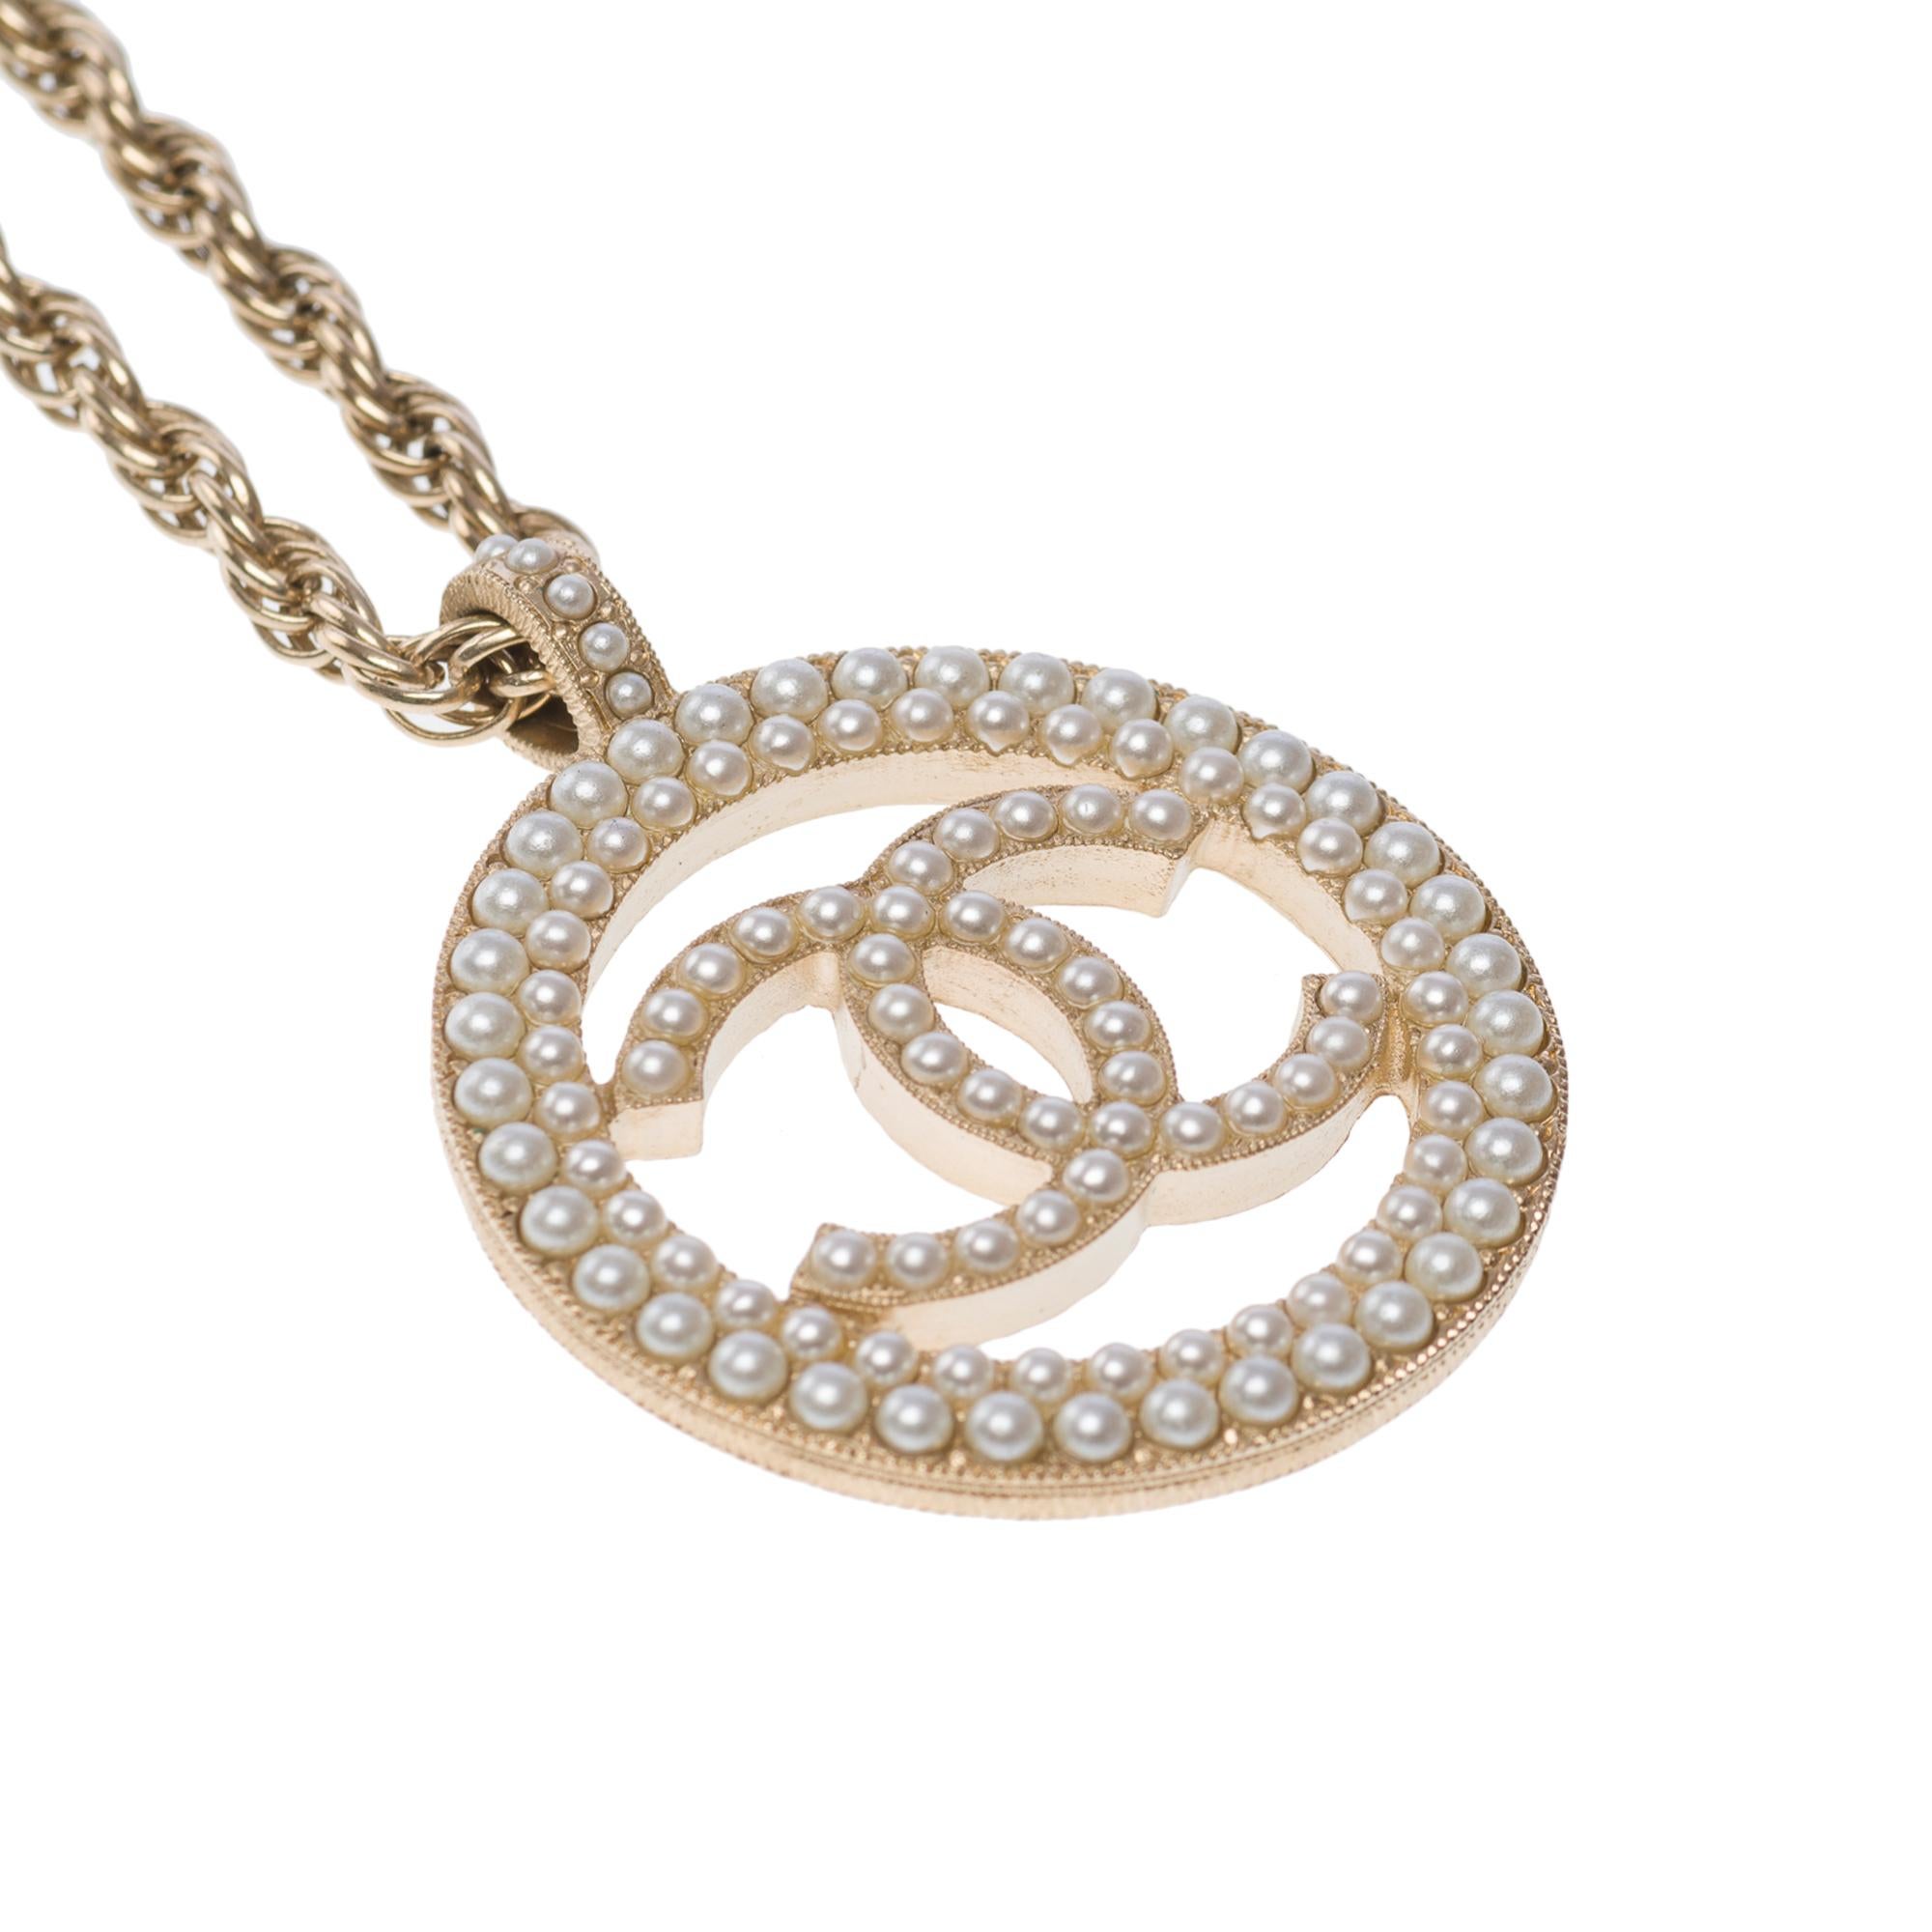 Contemporary  Chanel Necklace CC With Pearl and Gold color metal For Sale